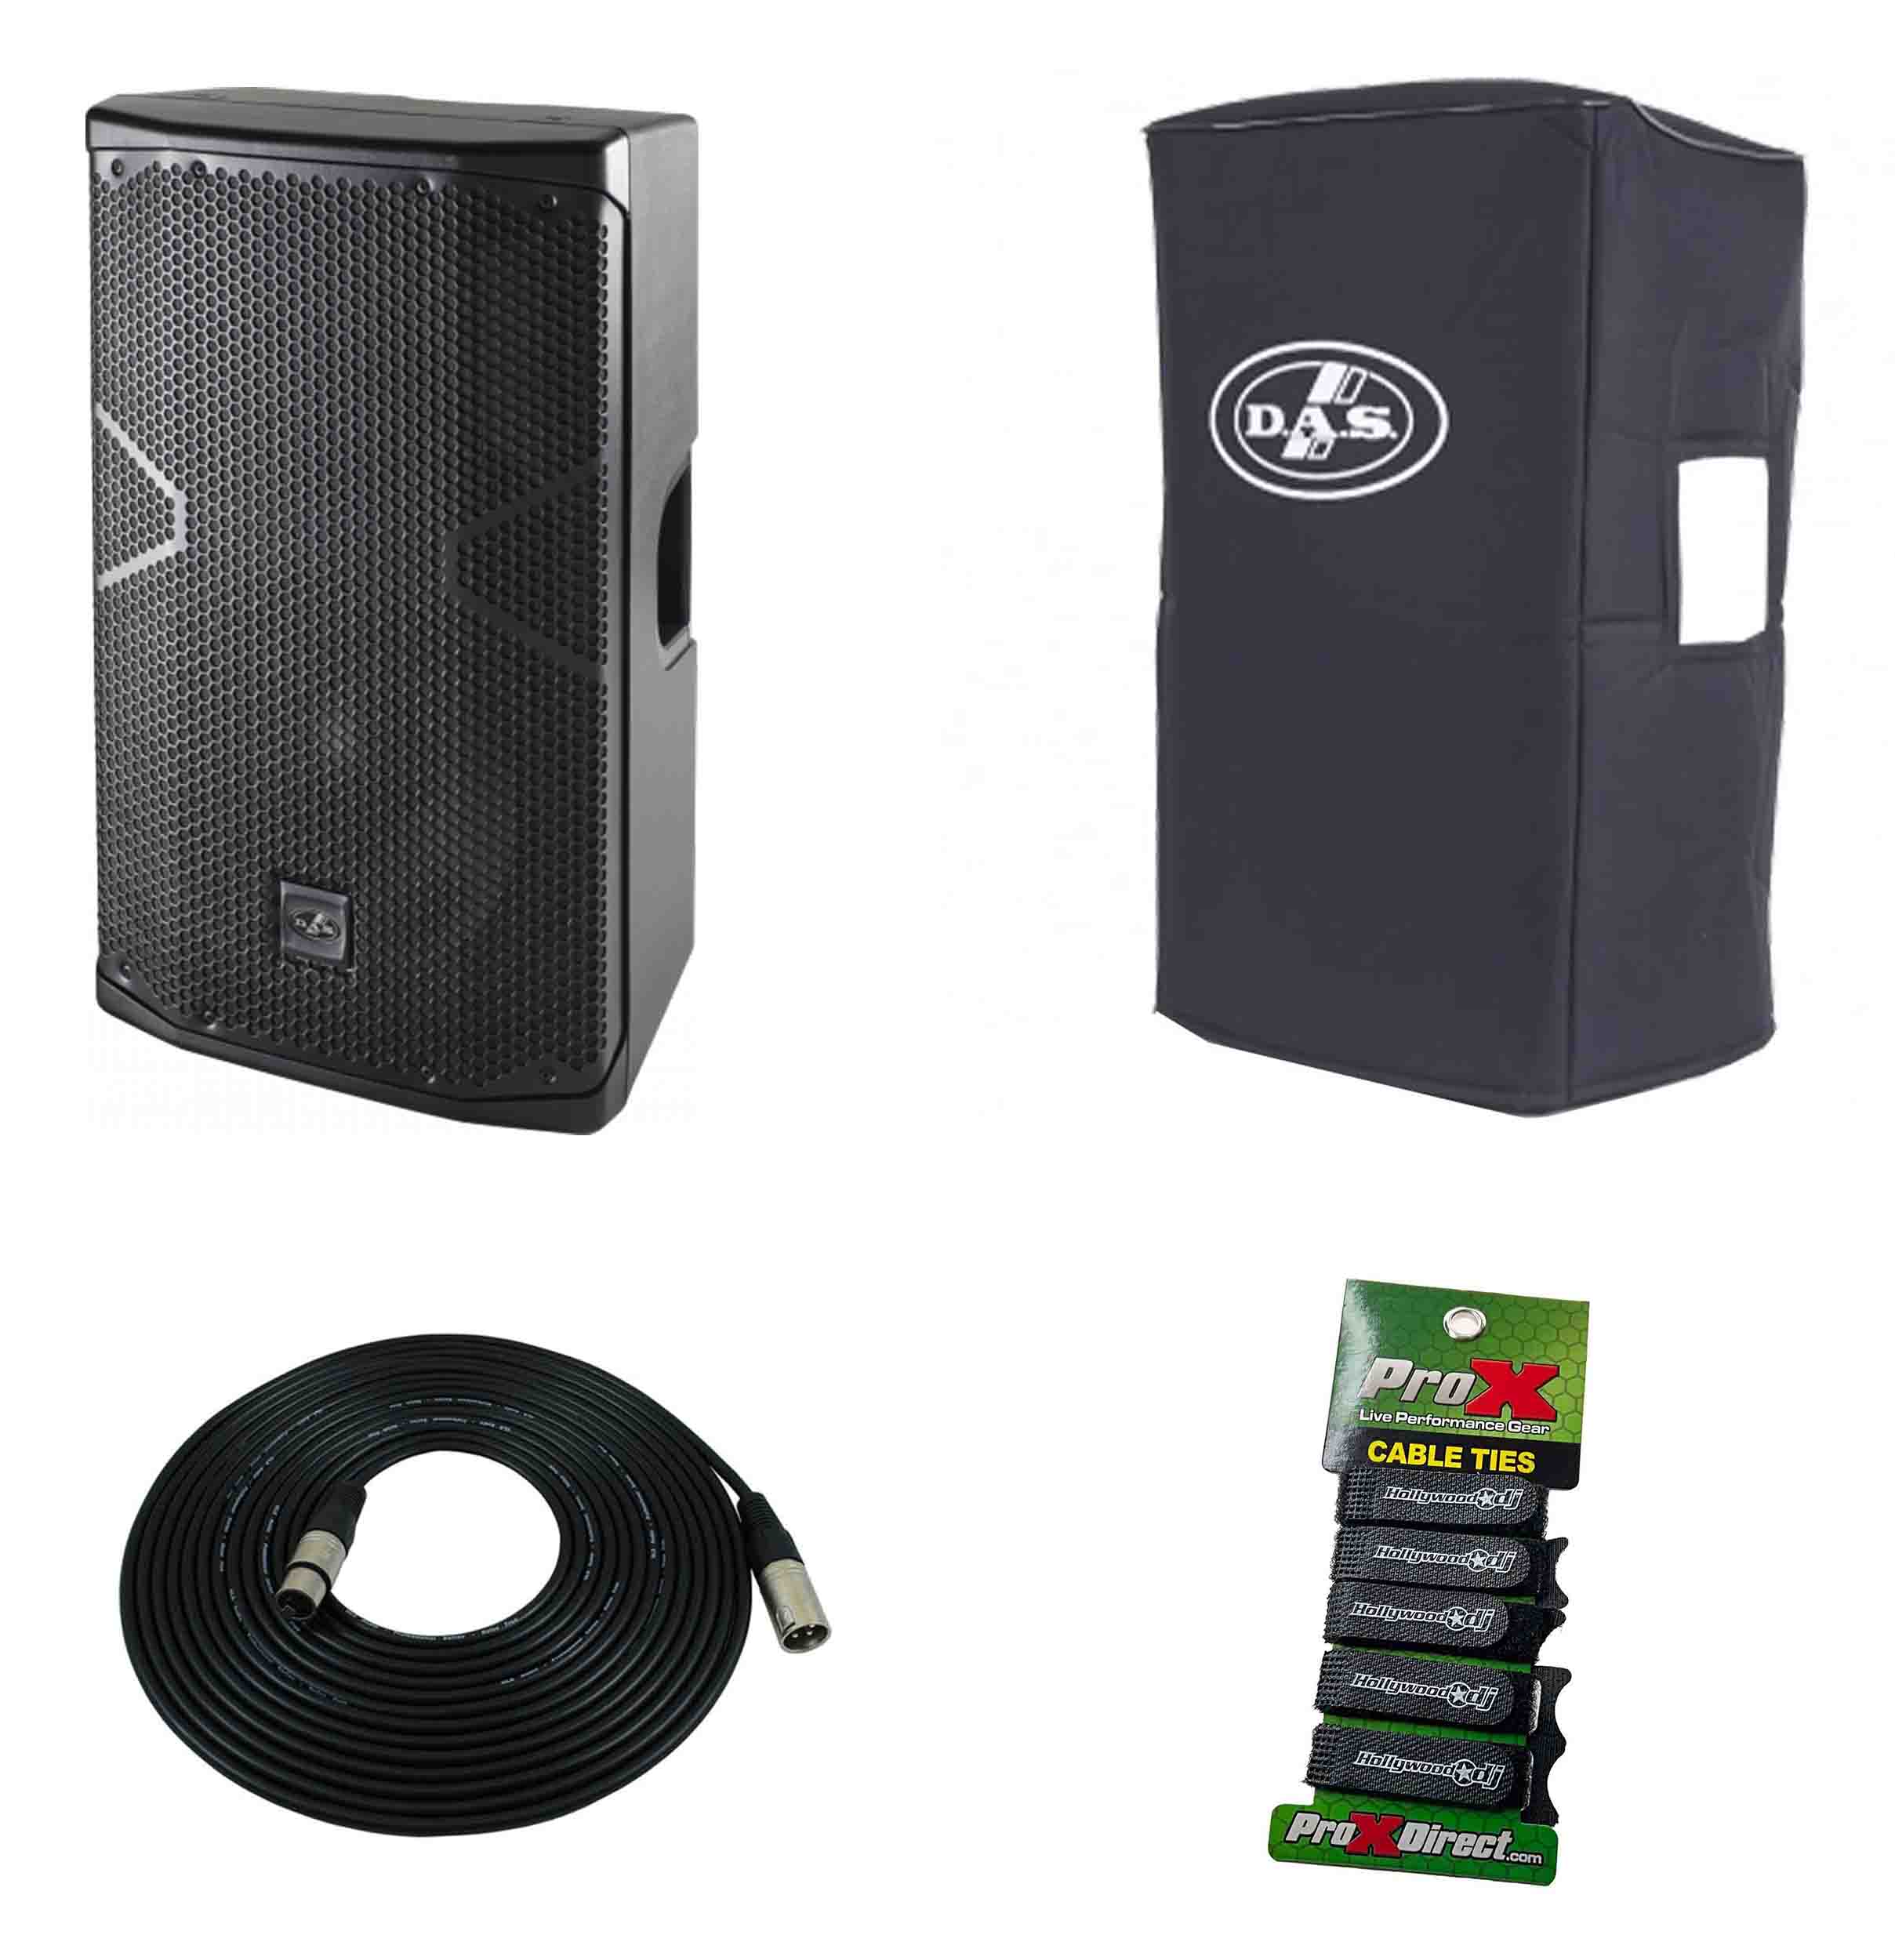 DAS Audio 412ACVR12MIC25TIE 12-Inch Powered Speaker DJ Package with Cover and Cable by DAS Audio